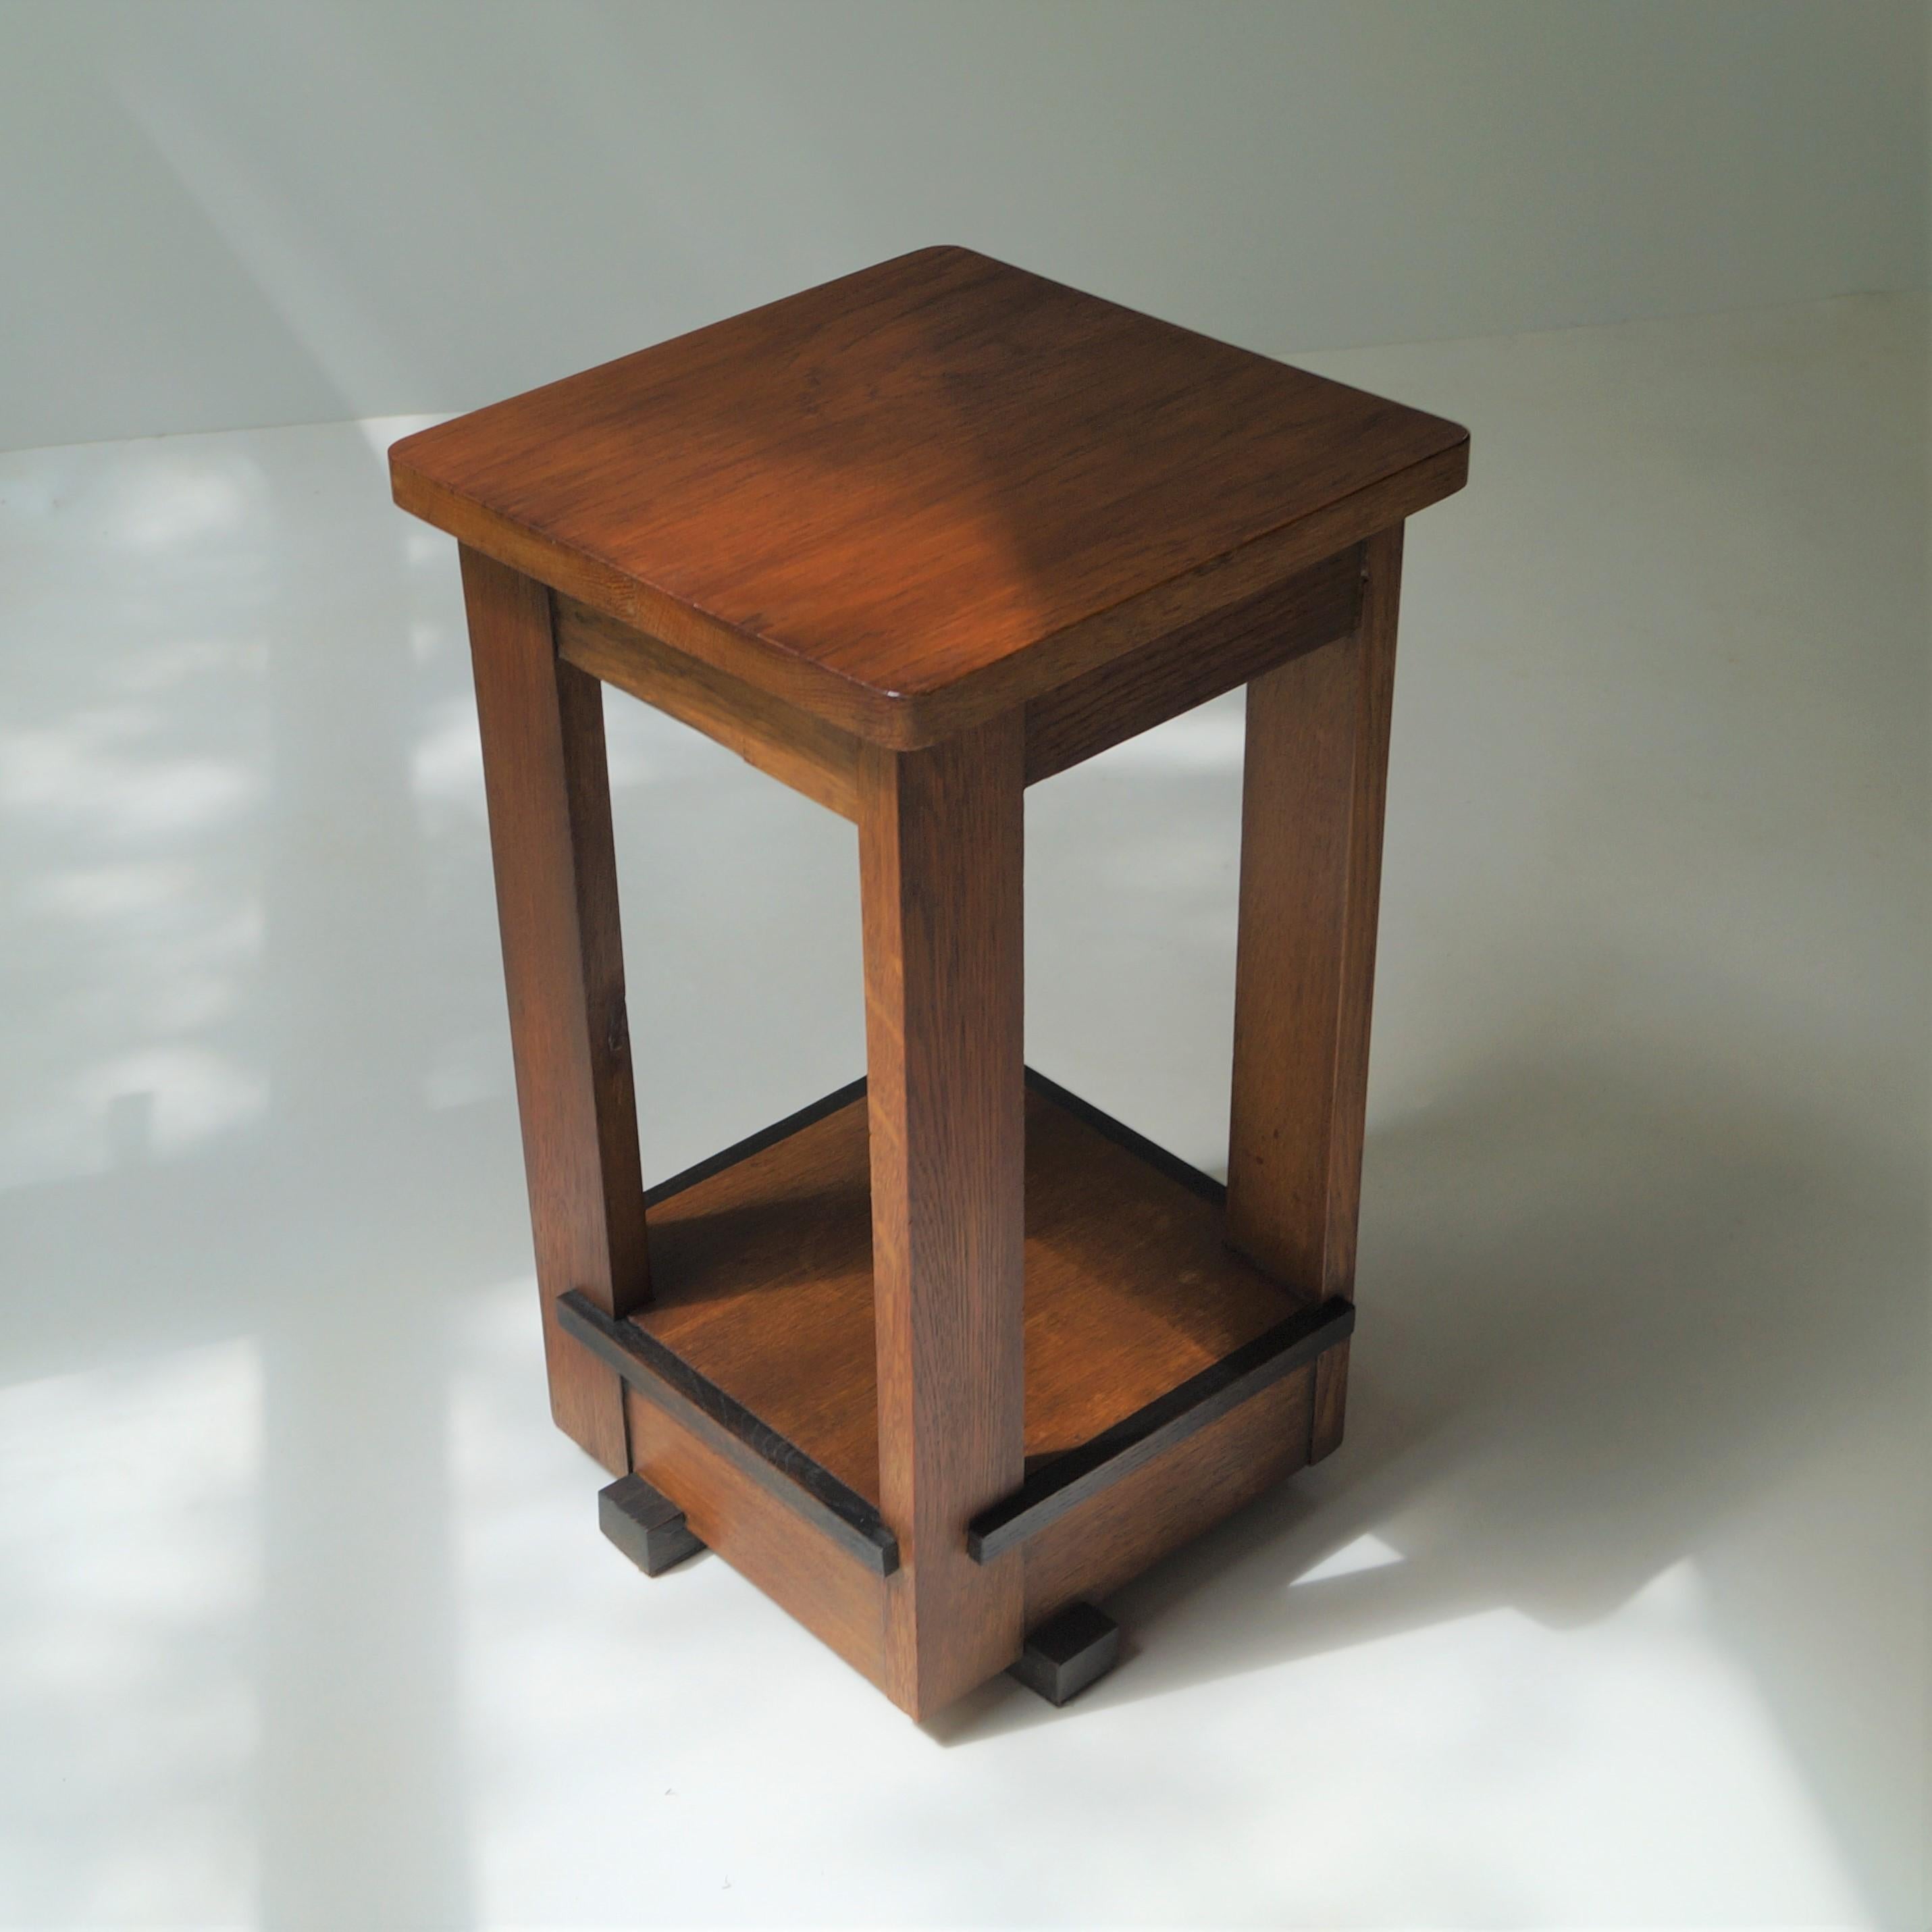 Dutch Art Deco Haagse School side table attributed to Jan Brunott, 1920s For Sale 9